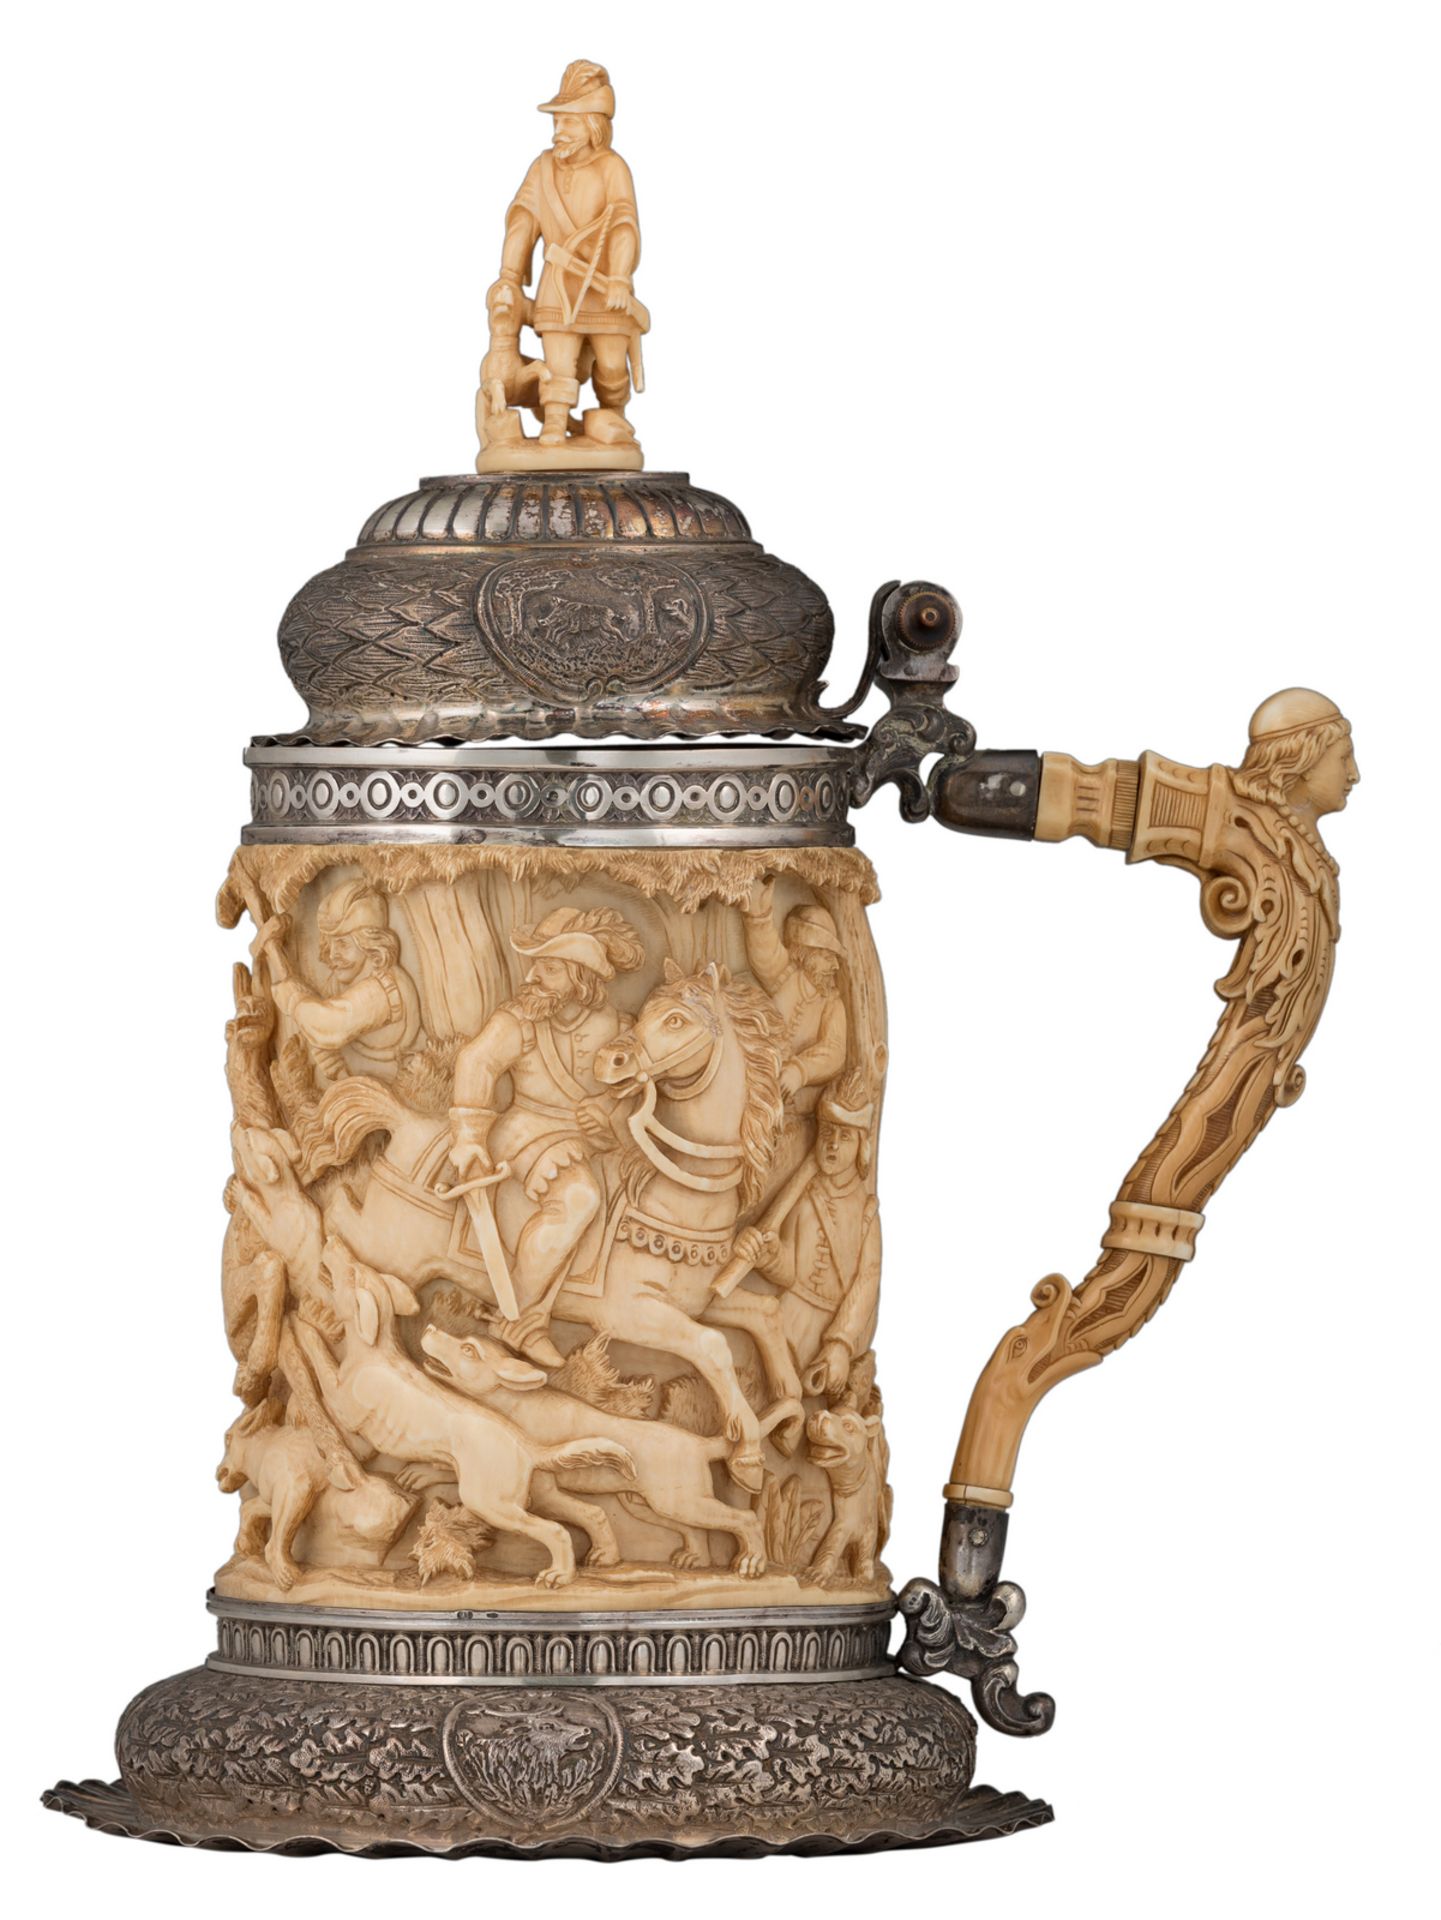 A first quarter of the 20thC Austro-Hungarian silver mounted humpen in the 17thC manner, the ivory